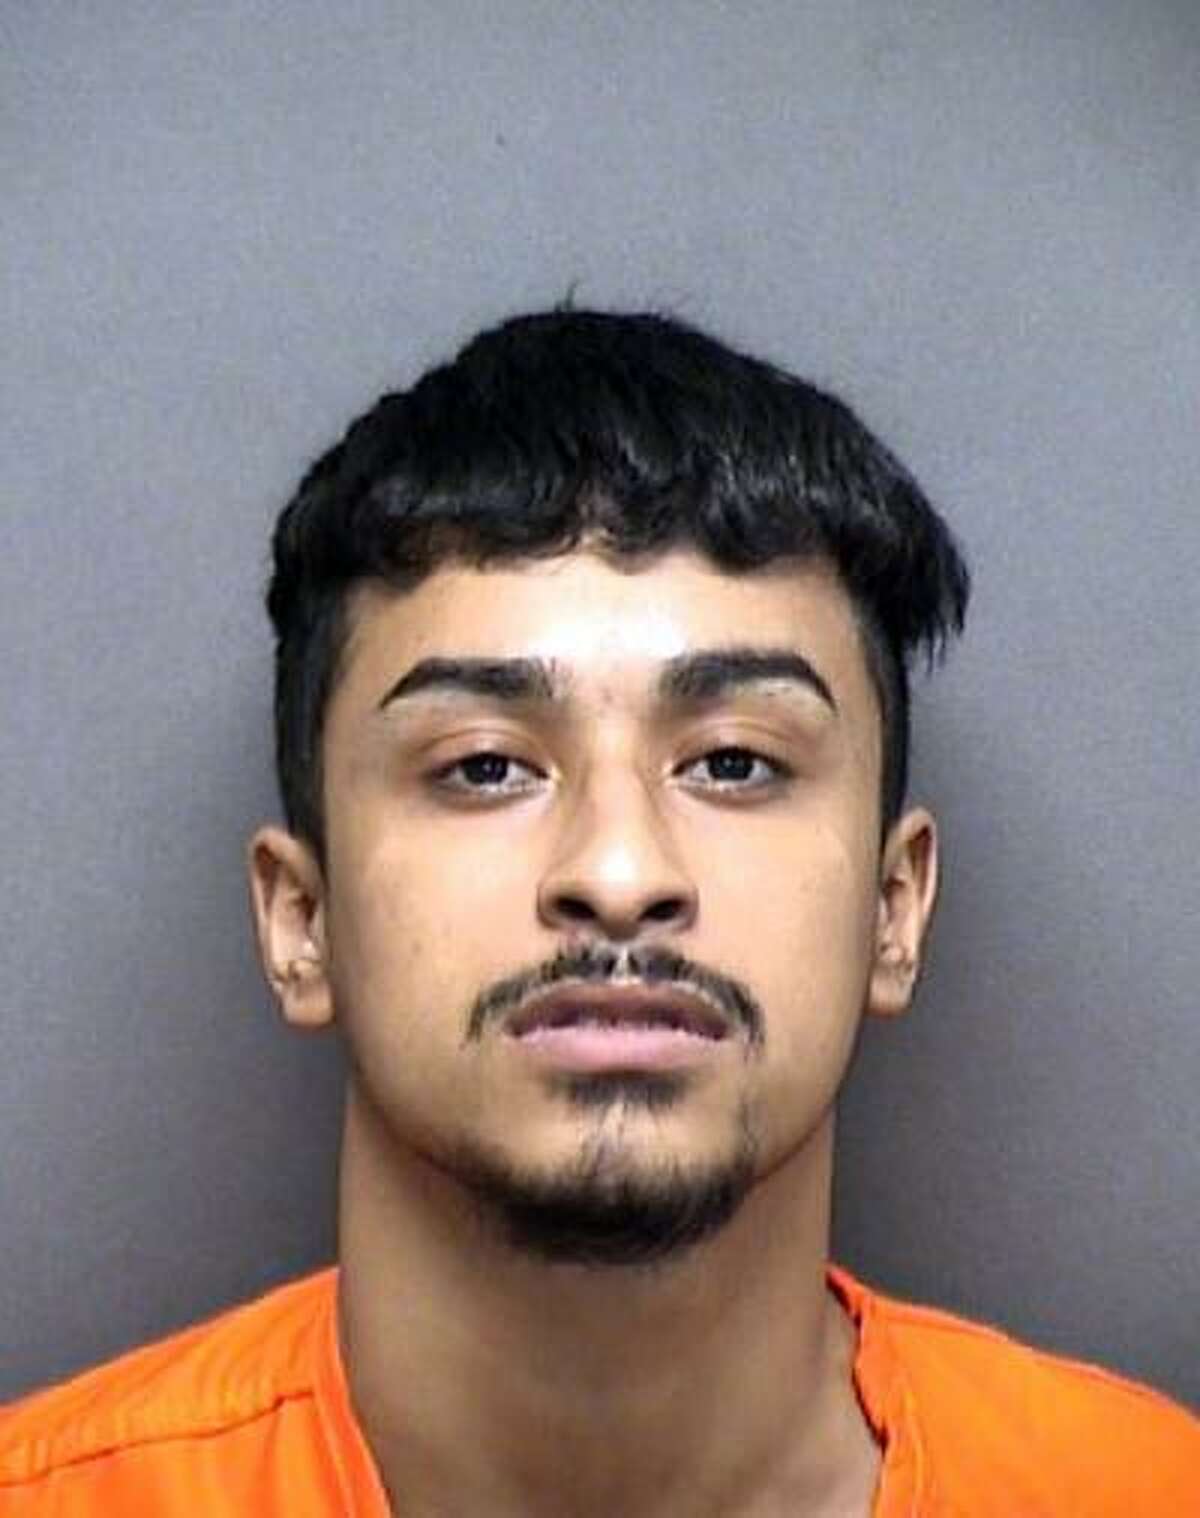 Adrian Cardenas, 23, pleaded guilty Monday to attempted capital murder of a police officer, aggravated assault and robbery.